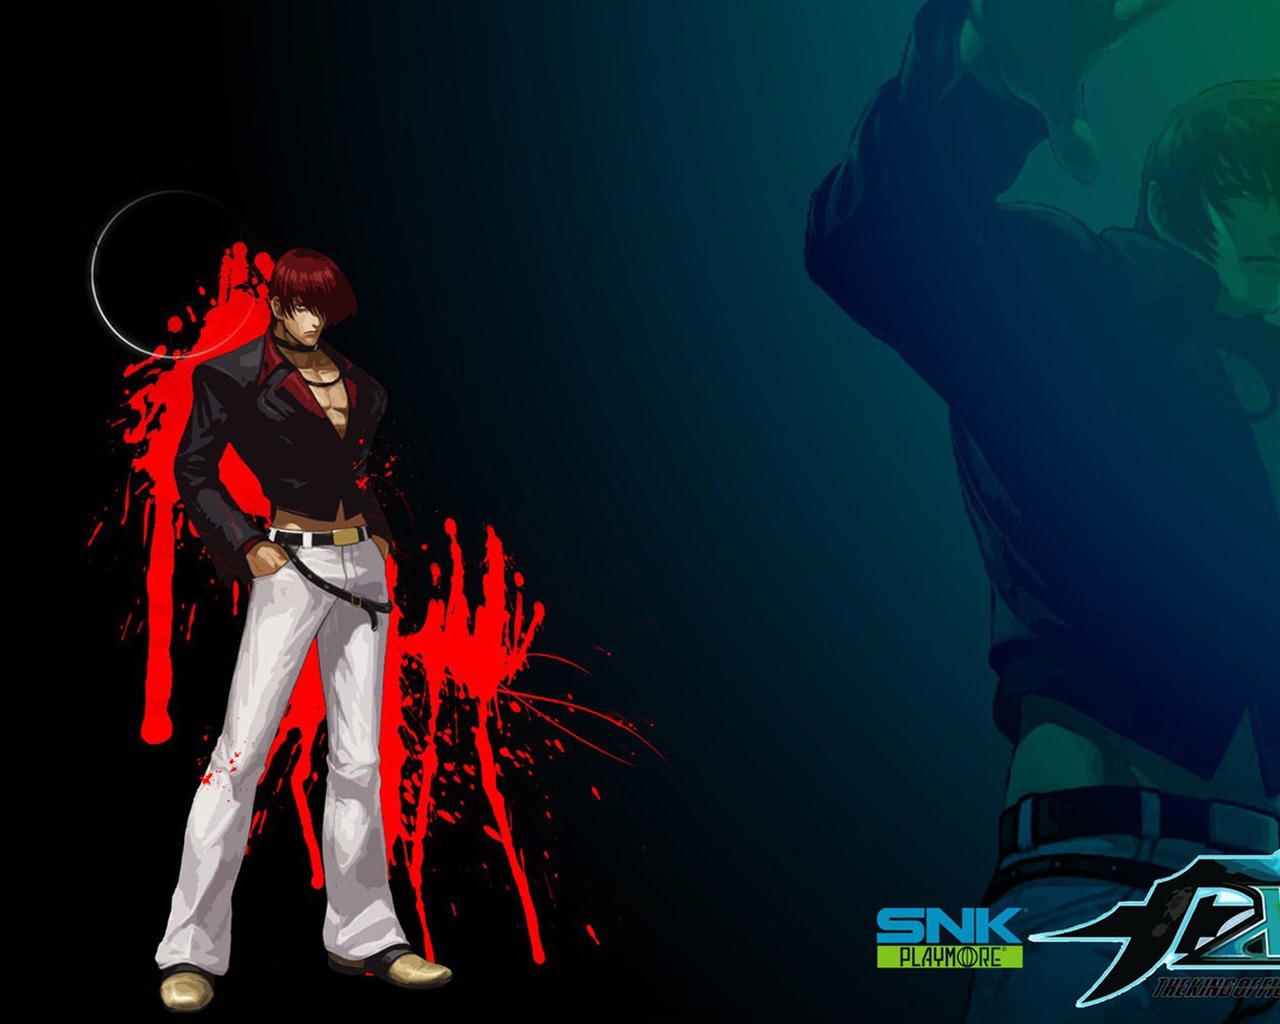 The King of Fighters XIII 拳皇13 壁纸专辑12 - 1280x1024